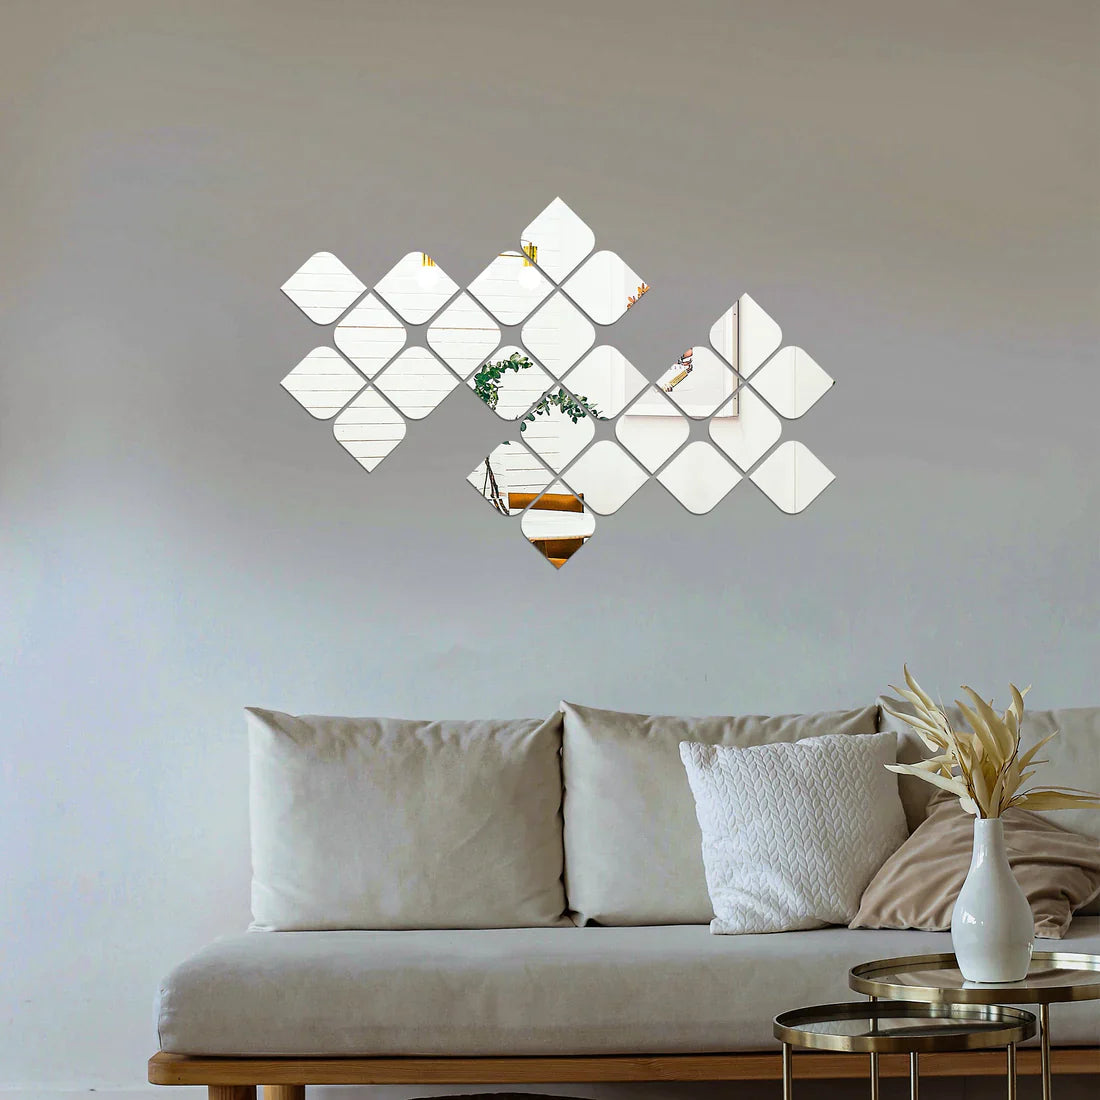 Acrylic Quadrilateral Mirror Wall Stickers